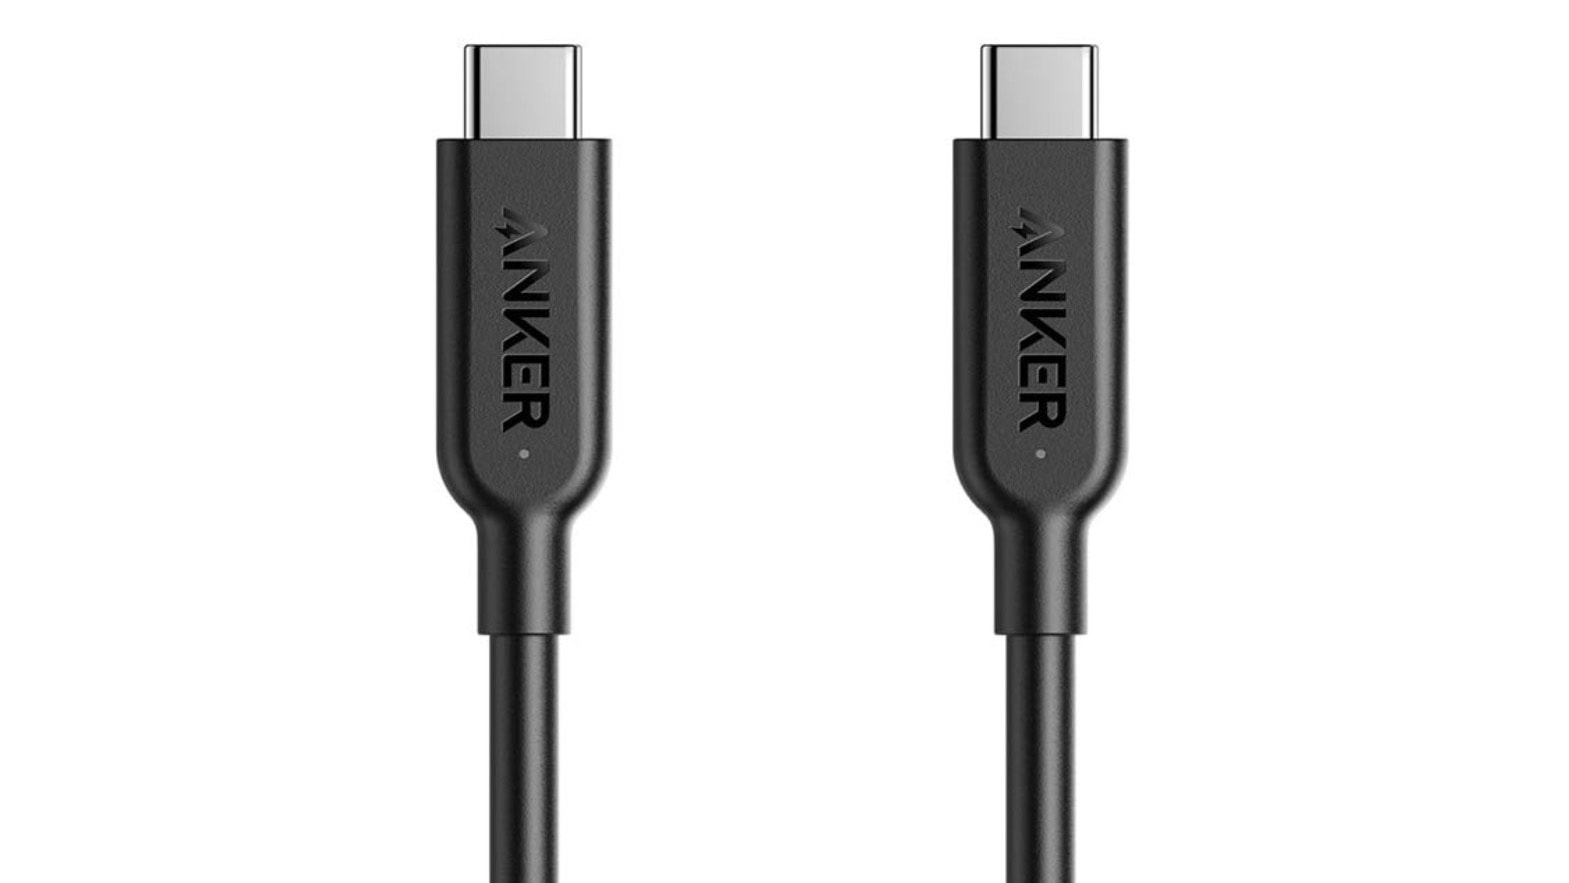 Anker USB-C to USB-C 3.1 Gen 2 cable